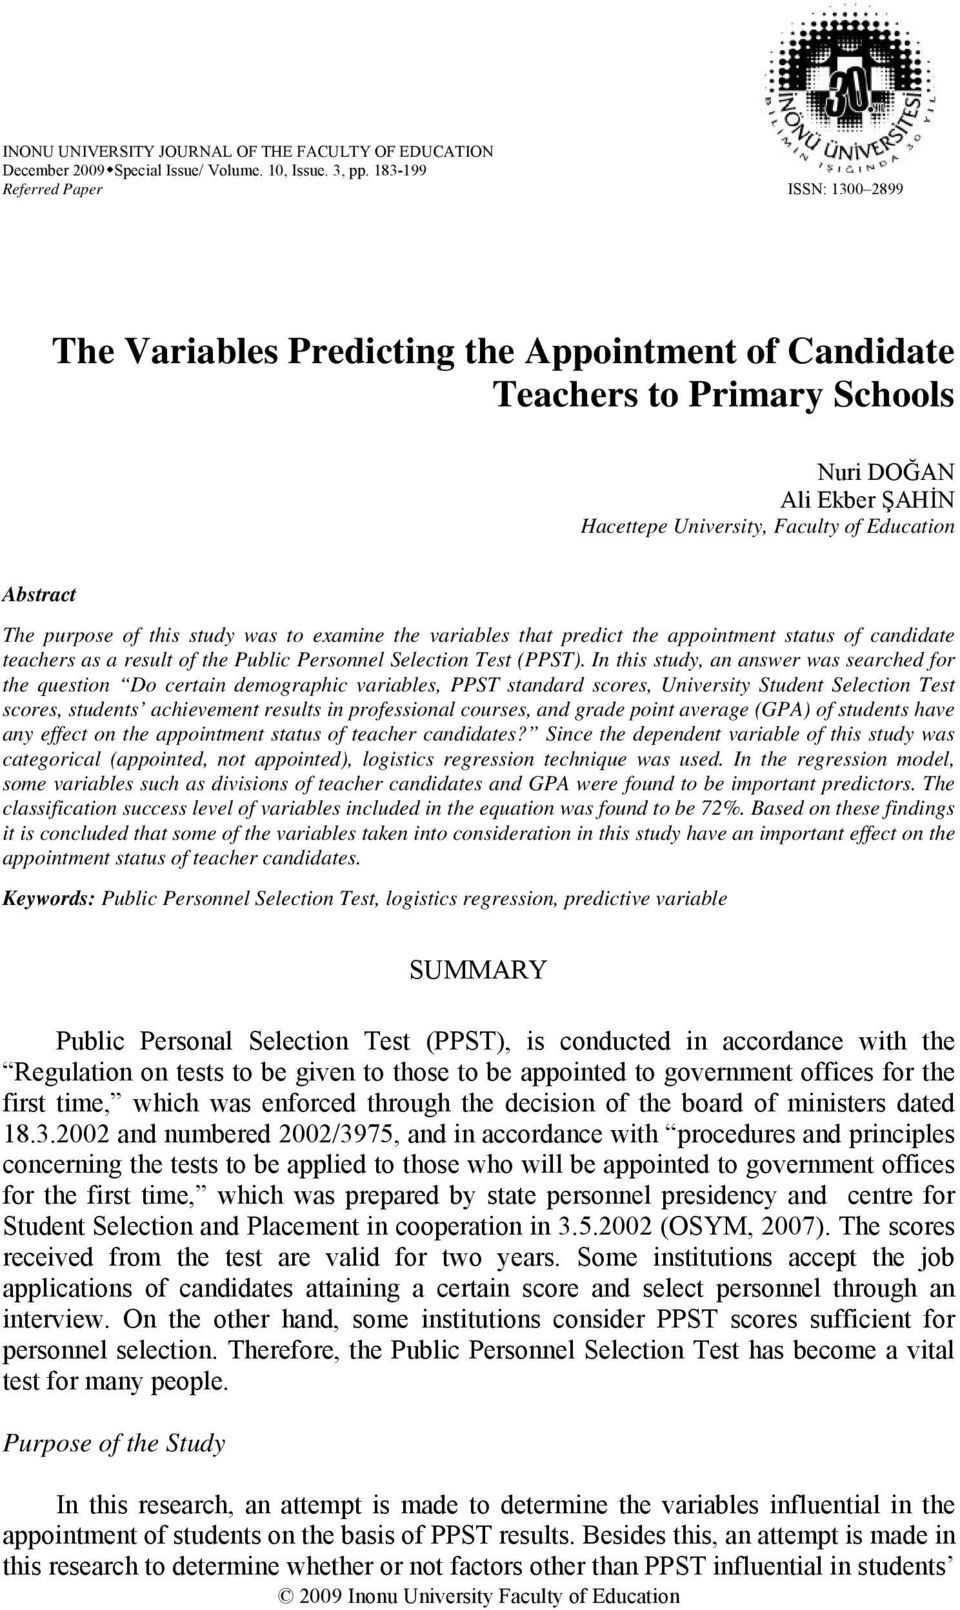 The purpose of this study was to examine the variables that predict the appointment status of candidate teachers as a result of the Public Personnel Selection Test (PPST).